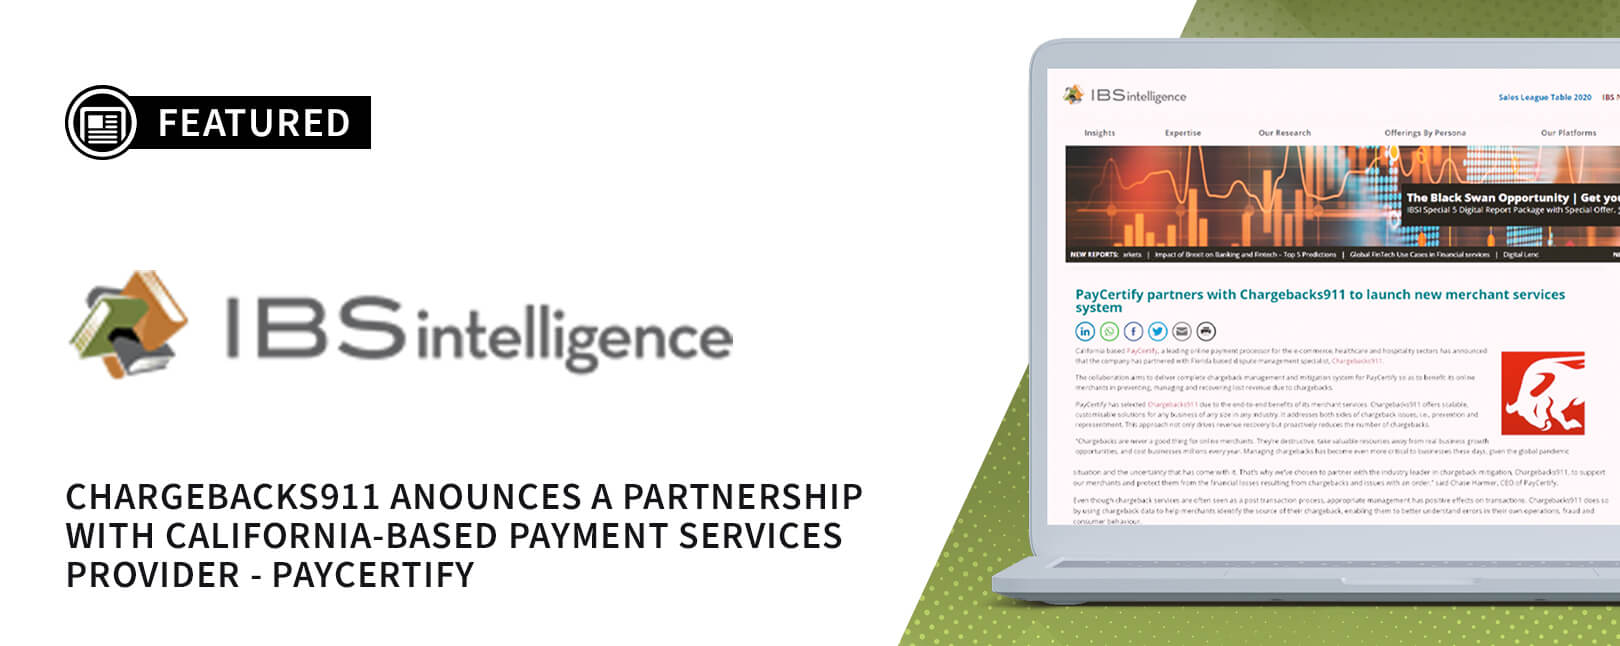 Chargebacks911® & PayCertify Partnership Featured on IBS Intelligence